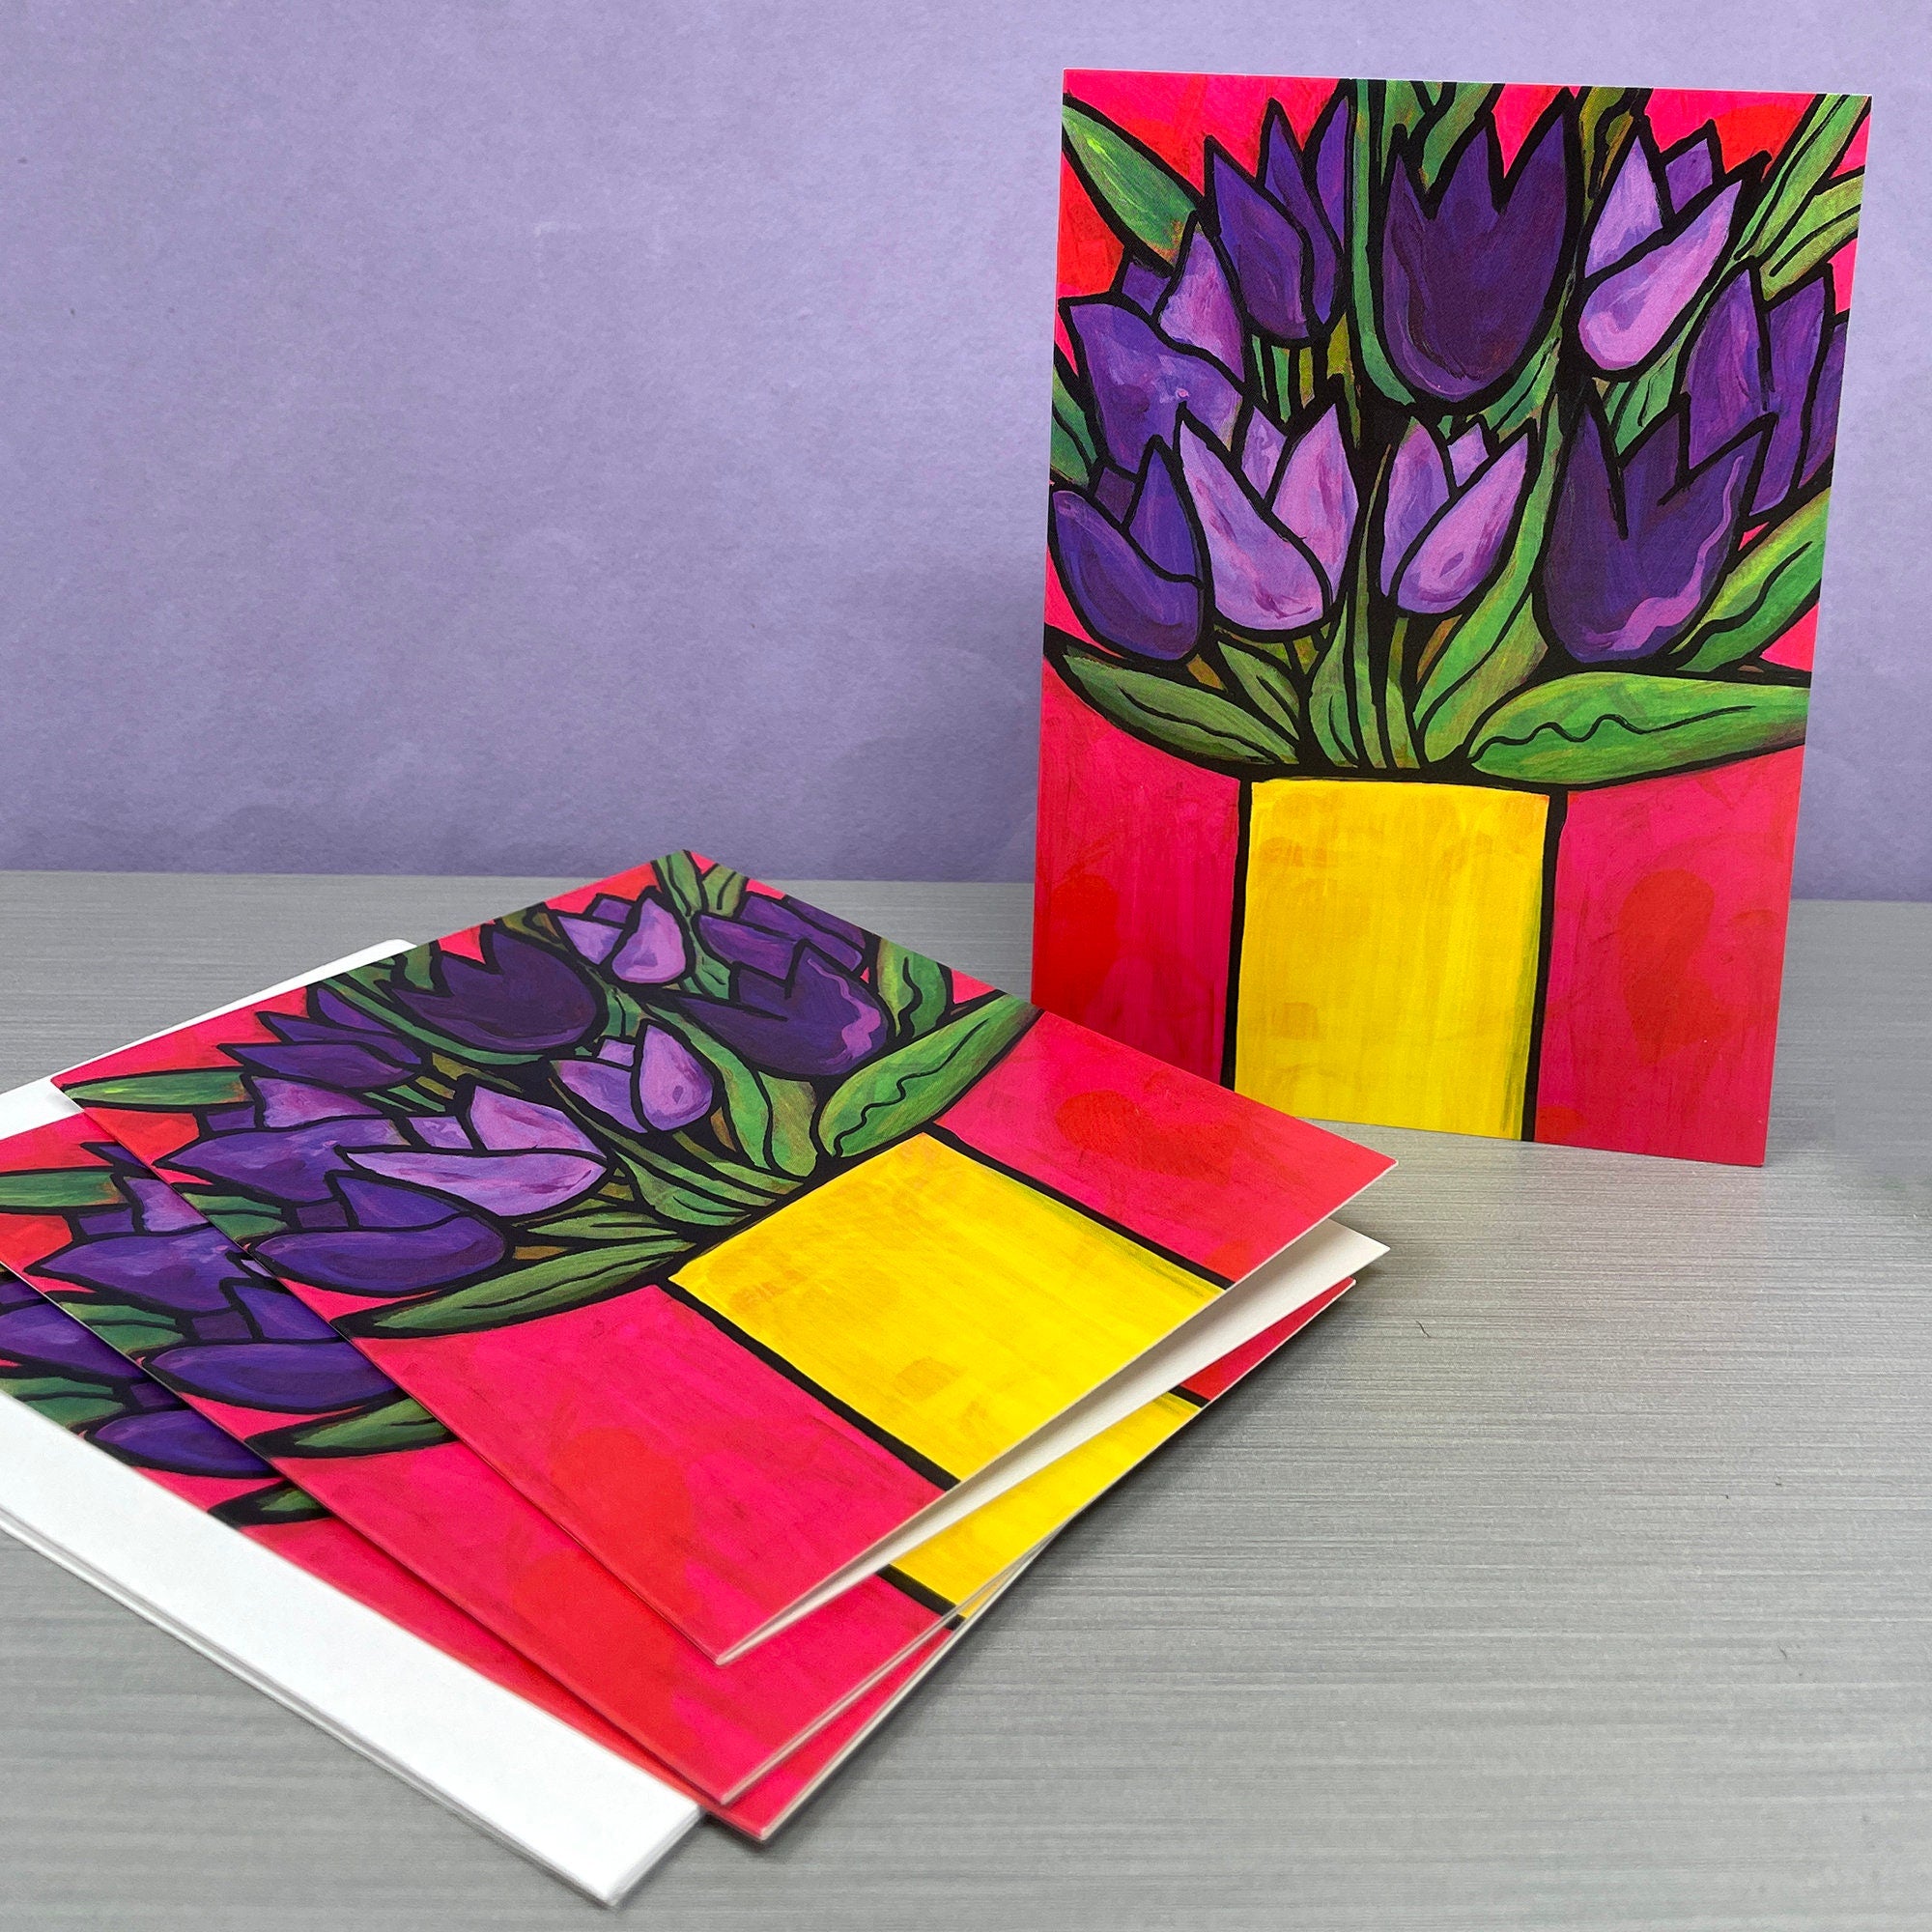 Purple Tulip Card - Blank Flower Notecard for Any Occasion, Thank You, Thinking of You, Gift Card, Teacher Gift